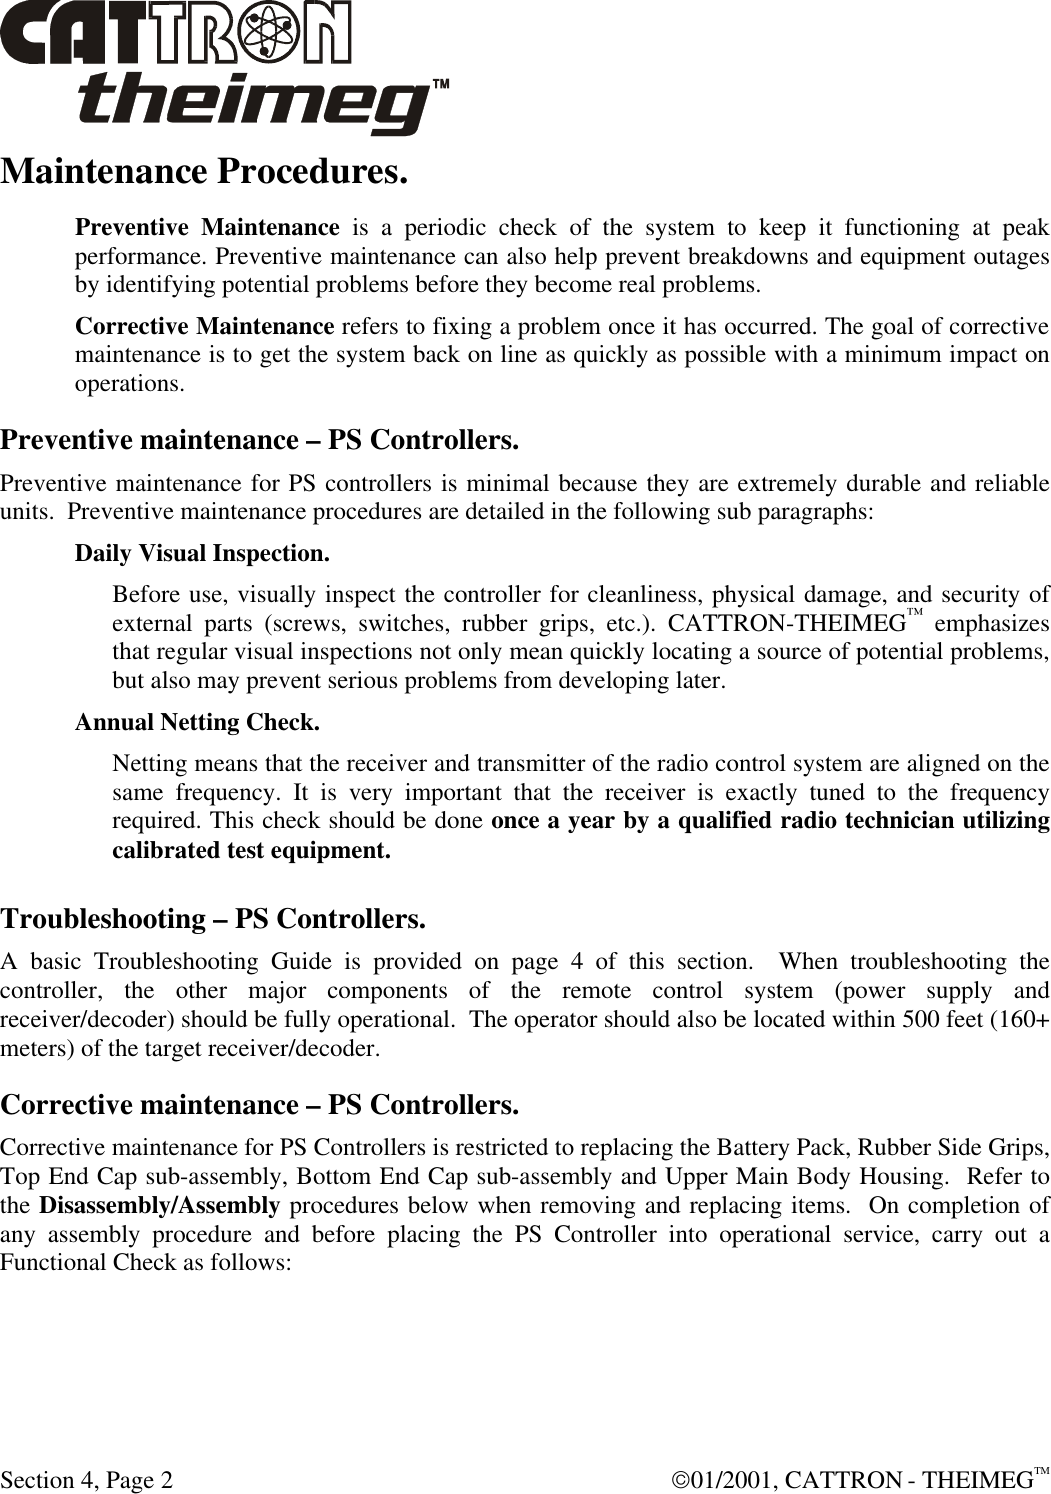  Section 4, Page 2  01/2001, CATTRON - THEIMEGTM Maintenance Procedures. Preventive Maintenance is a periodic check of the system to keep it functioning at peak performance. Preventive maintenance can also help prevent breakdowns and equipment outages by identifying potential problems before they become real problems.  Corrective Maintenance refers to fixing a problem once it has occurred. The goal of corrective maintenance is to get the system back on line as quickly as possible with a minimum impact on operations. Preventive maintenance – PS Controllers. Preventive maintenance for PS controllers is minimal because they are extremely durable and reliable units.  Preventive maintenance procedures are detailed in the following sub paragraphs: Daily Visual Inspection. Before use, visually inspect the controller for cleanliness, physical damage, and security of external parts (screws, switches, rubber grips, etc.). CATTRON-THEIMEG™ emphasizes that regular visual inspections not only mean quickly locating a source of potential problems, but also may prevent serious problems from developing later. Annual Netting Check. Netting means that the receiver and transmitter of the radio control system are aligned on the same frequency. It is very important that the receiver is exactly tuned to the frequency required. This check should be done once a year by a qualified radio technician utilizing calibrated test equipment. Troubleshooting – PS Controllers. A basic Troubleshooting Guide is provided on page 4 of this section.  When troubleshooting the controller, the other major components of the remote control system (power supply and receiver/decoder) should be fully operational.  The operator should also be located within 500 feet (160+ meters) of the target receiver/decoder.  Corrective maintenance – PS Controllers. Corrective maintenance for PS Controllers is restricted to replacing the Battery Pack, Rubber Side Grips, Top End Cap sub-assembly, Bottom End Cap sub-assembly and Upper Main Body Housing.  Refer to the Disassembly/Assembly procedures below when removing and replacing items.  On completion of any assembly procedure and before placing the PS Controller into operational service, carry out a Functional Check as follows:  